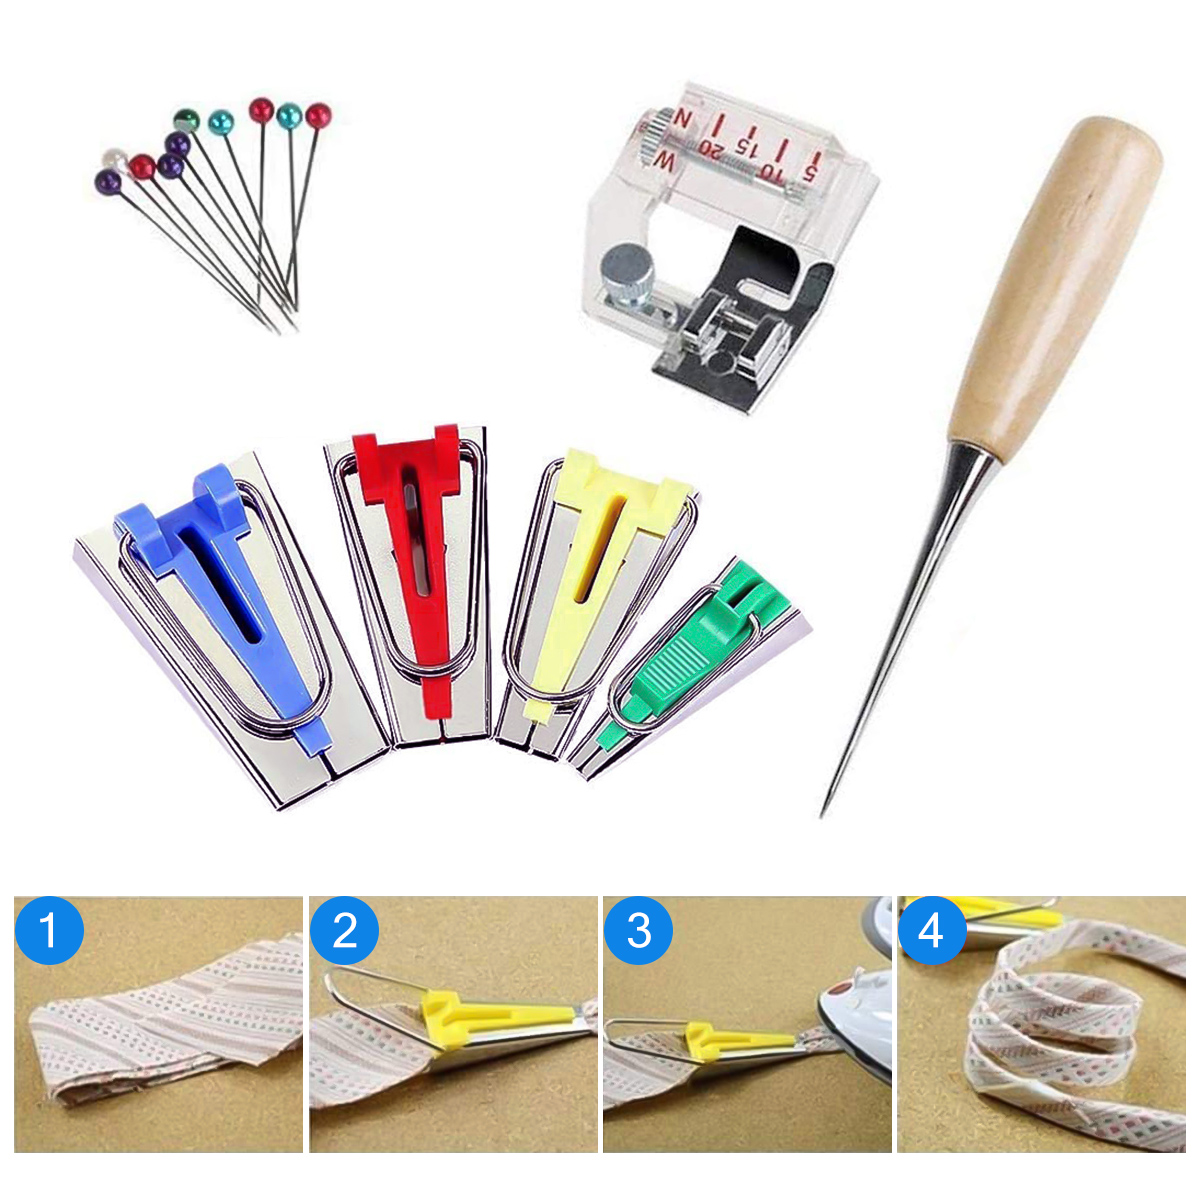 Sewing-Tape-Maker-Kits-4-Sizes-6MM-12MM-18MM-25MM-Household-DIY-Fabric-Patchwork-Sewing-Accessories--1707094-7